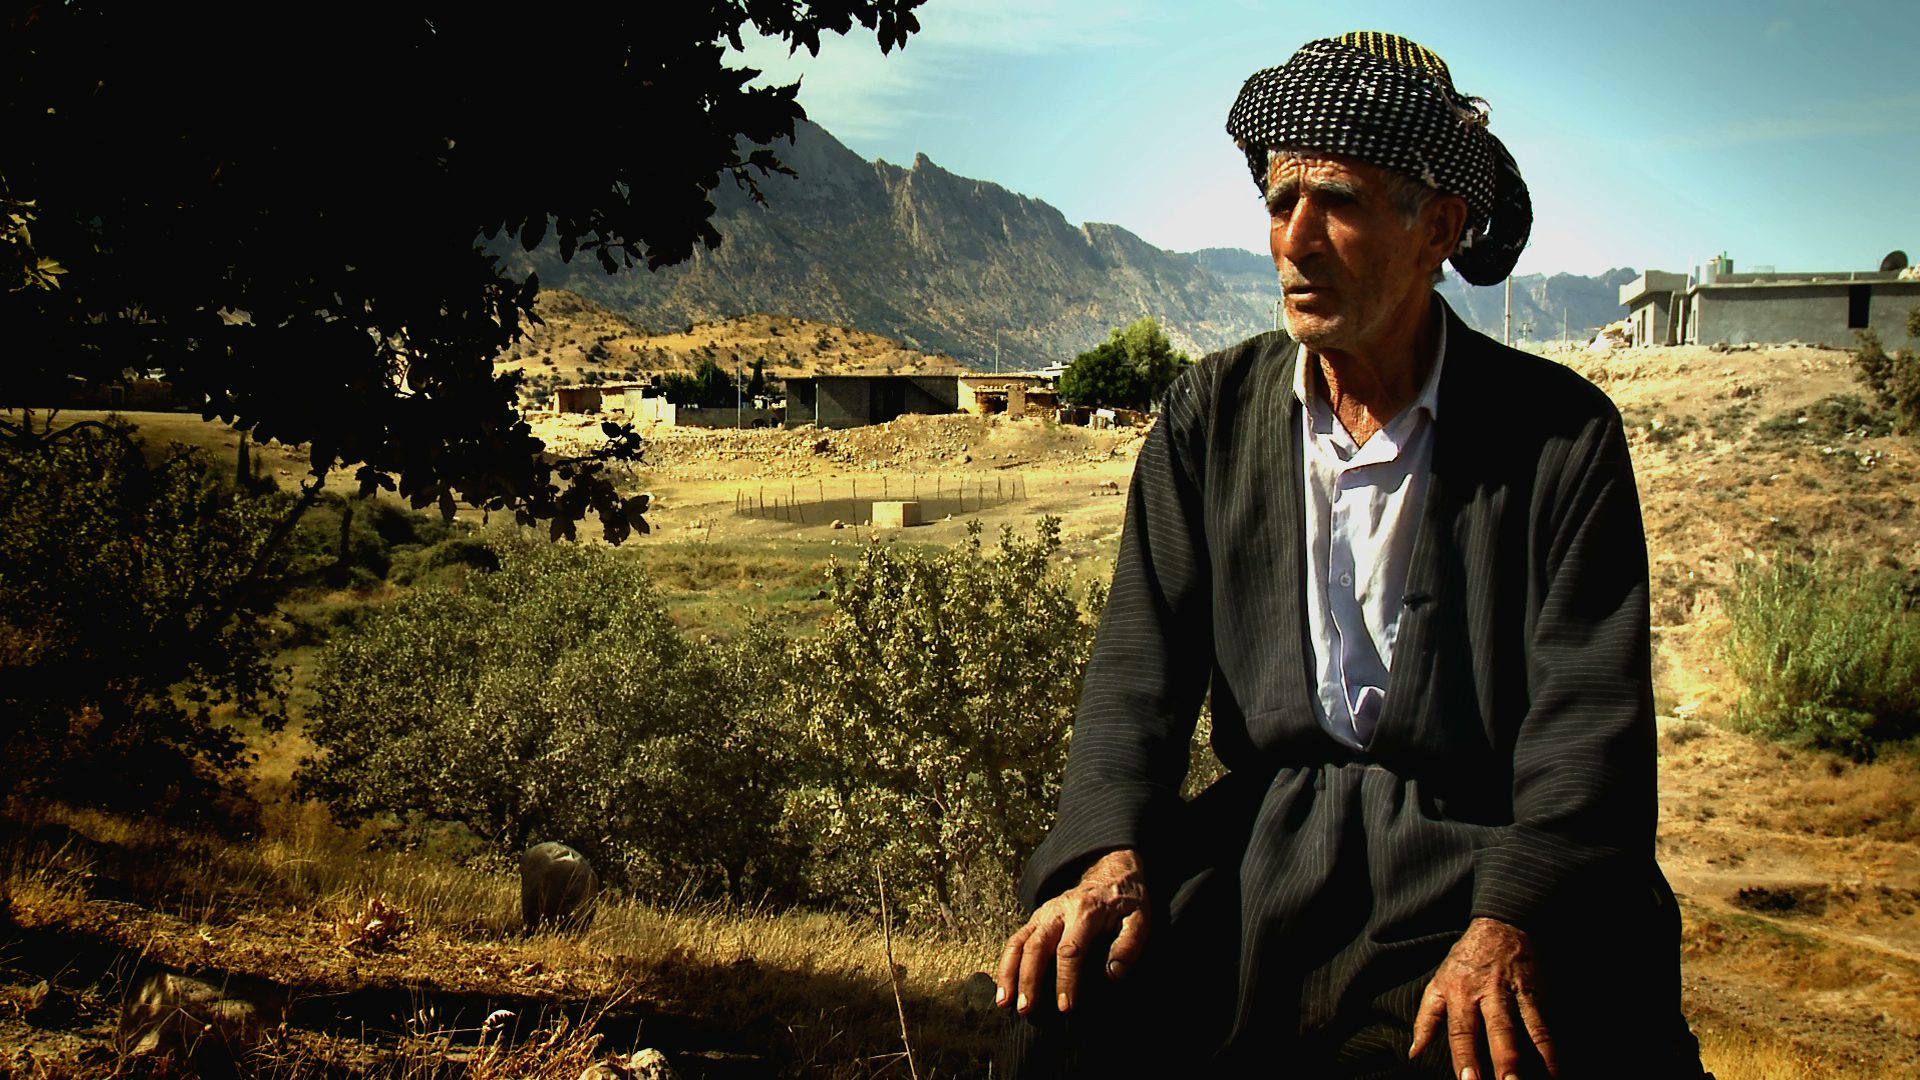 MAHMOUD RASUL MUSTAFA lost his wife, three sons and two daughters during Anfal. After the Kurdish uprising in 1991 he returned home to Aliawa village in the Qaradagh region but struggled to rebuild his life. In 2006 he testified against Saddam Hussein at the former Iraqi leaderâ€™s trial in Baghdad. 3/3.